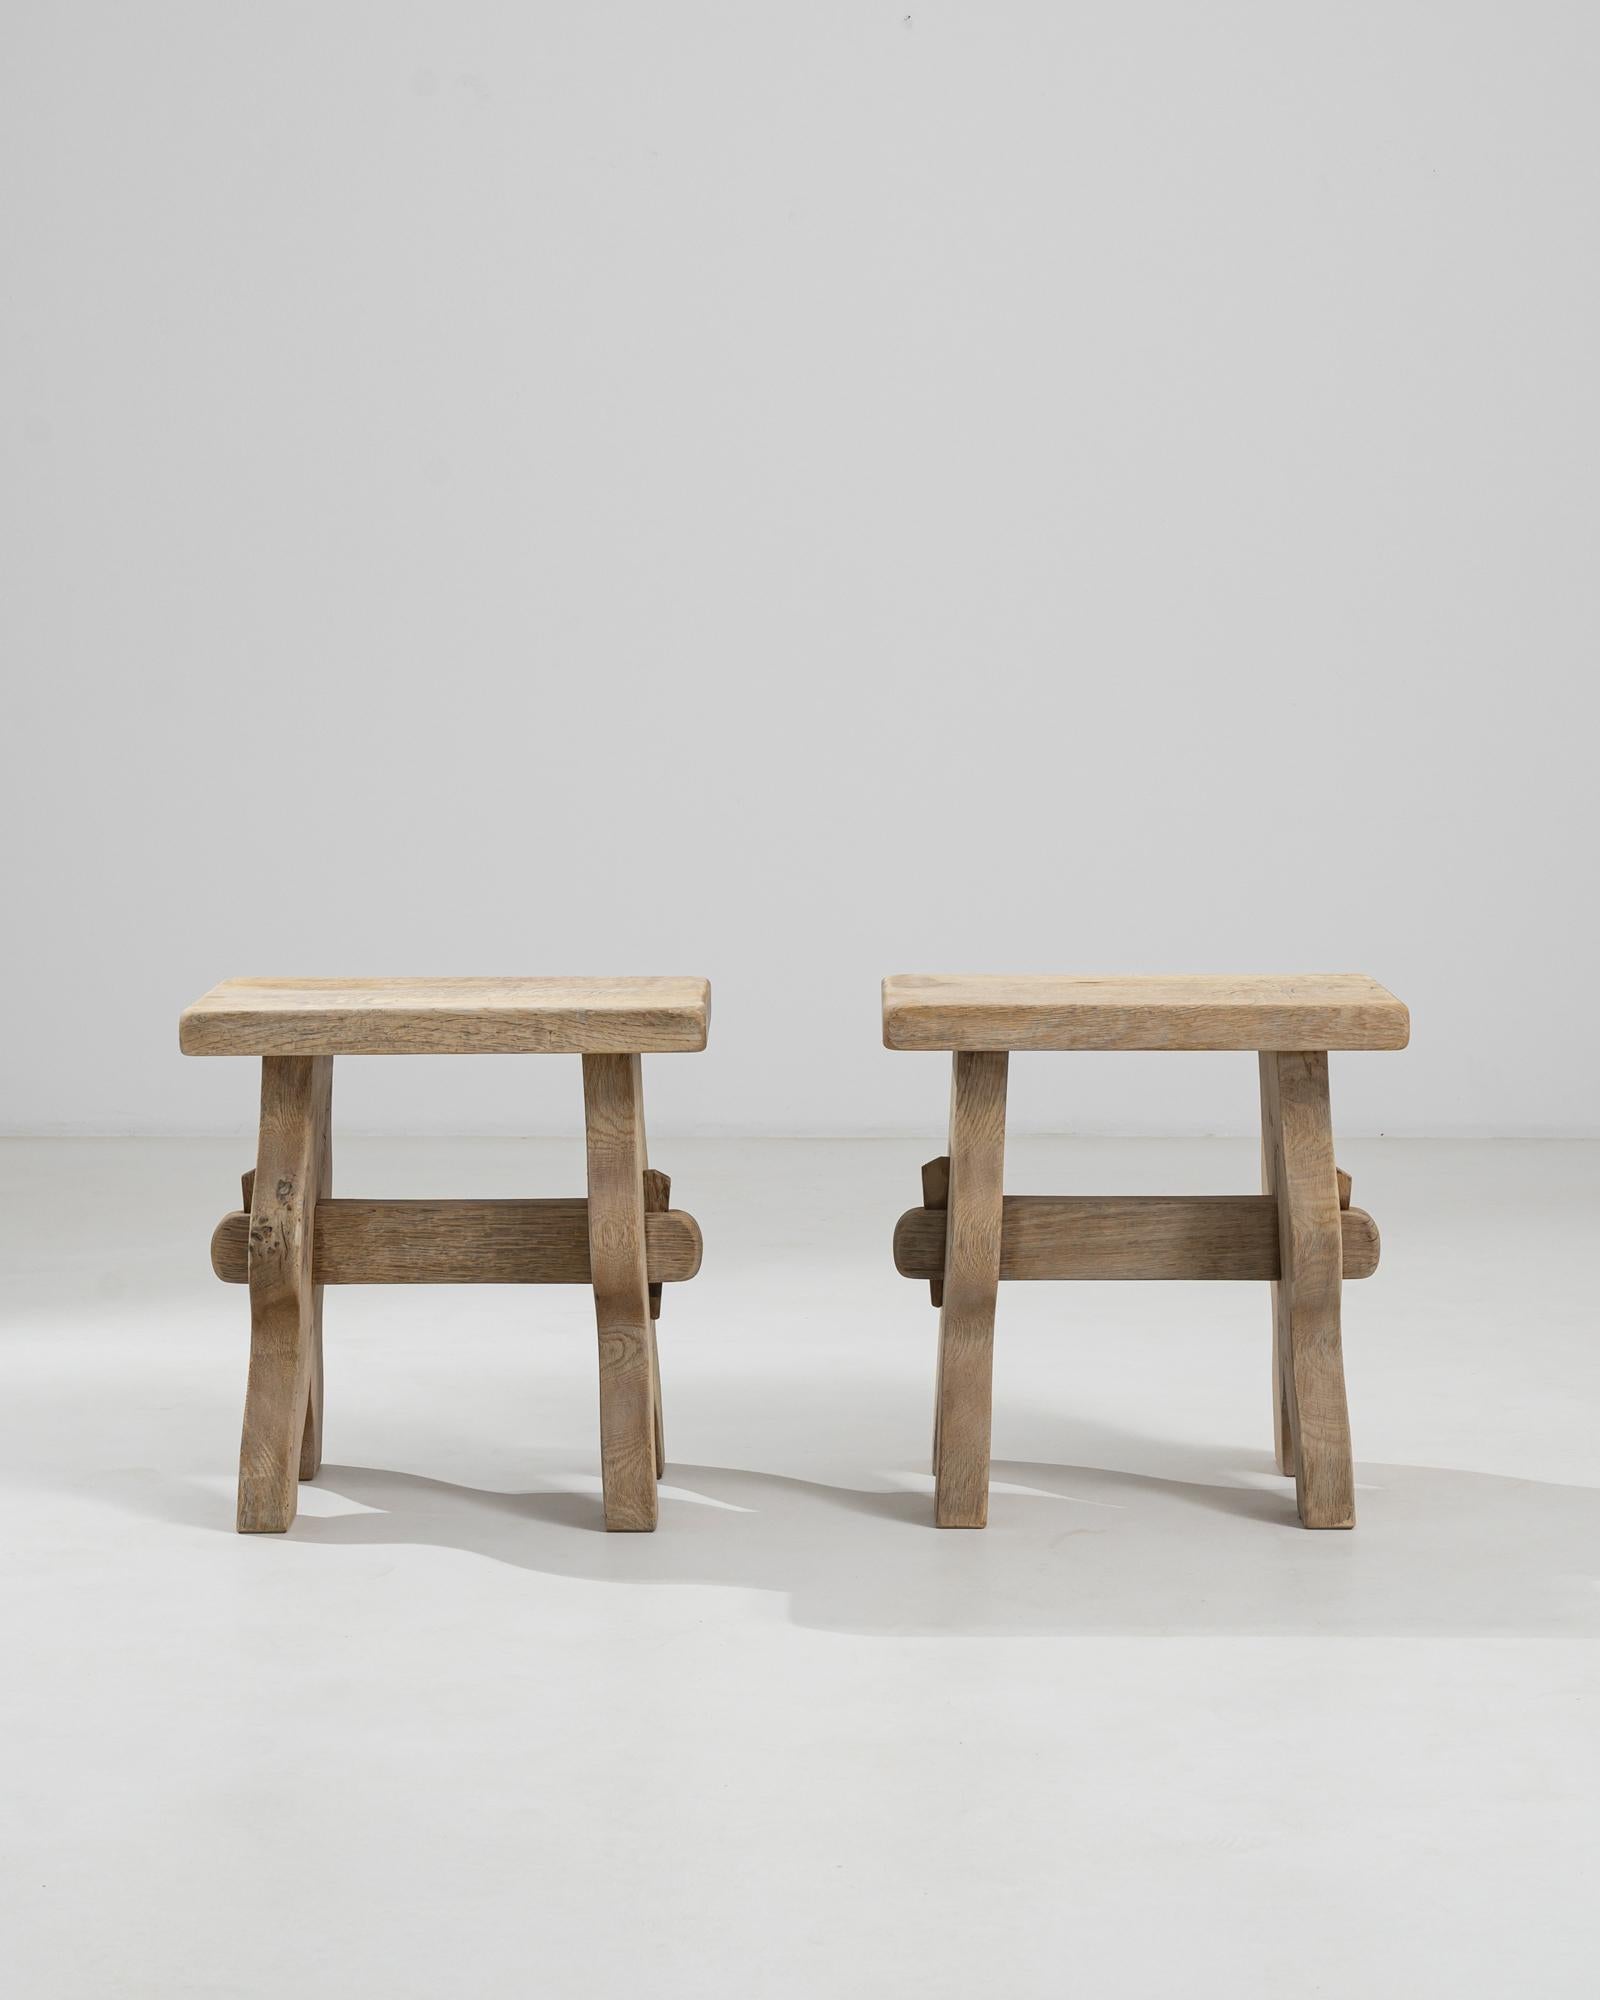 A simple oak stool from Belgium. Restored with a bleached oak finish, the light tone and natural texture recall a countryside locale. Spanned by a trestle and supported by four legs, this simple and practical oak stool accentuates any space with its